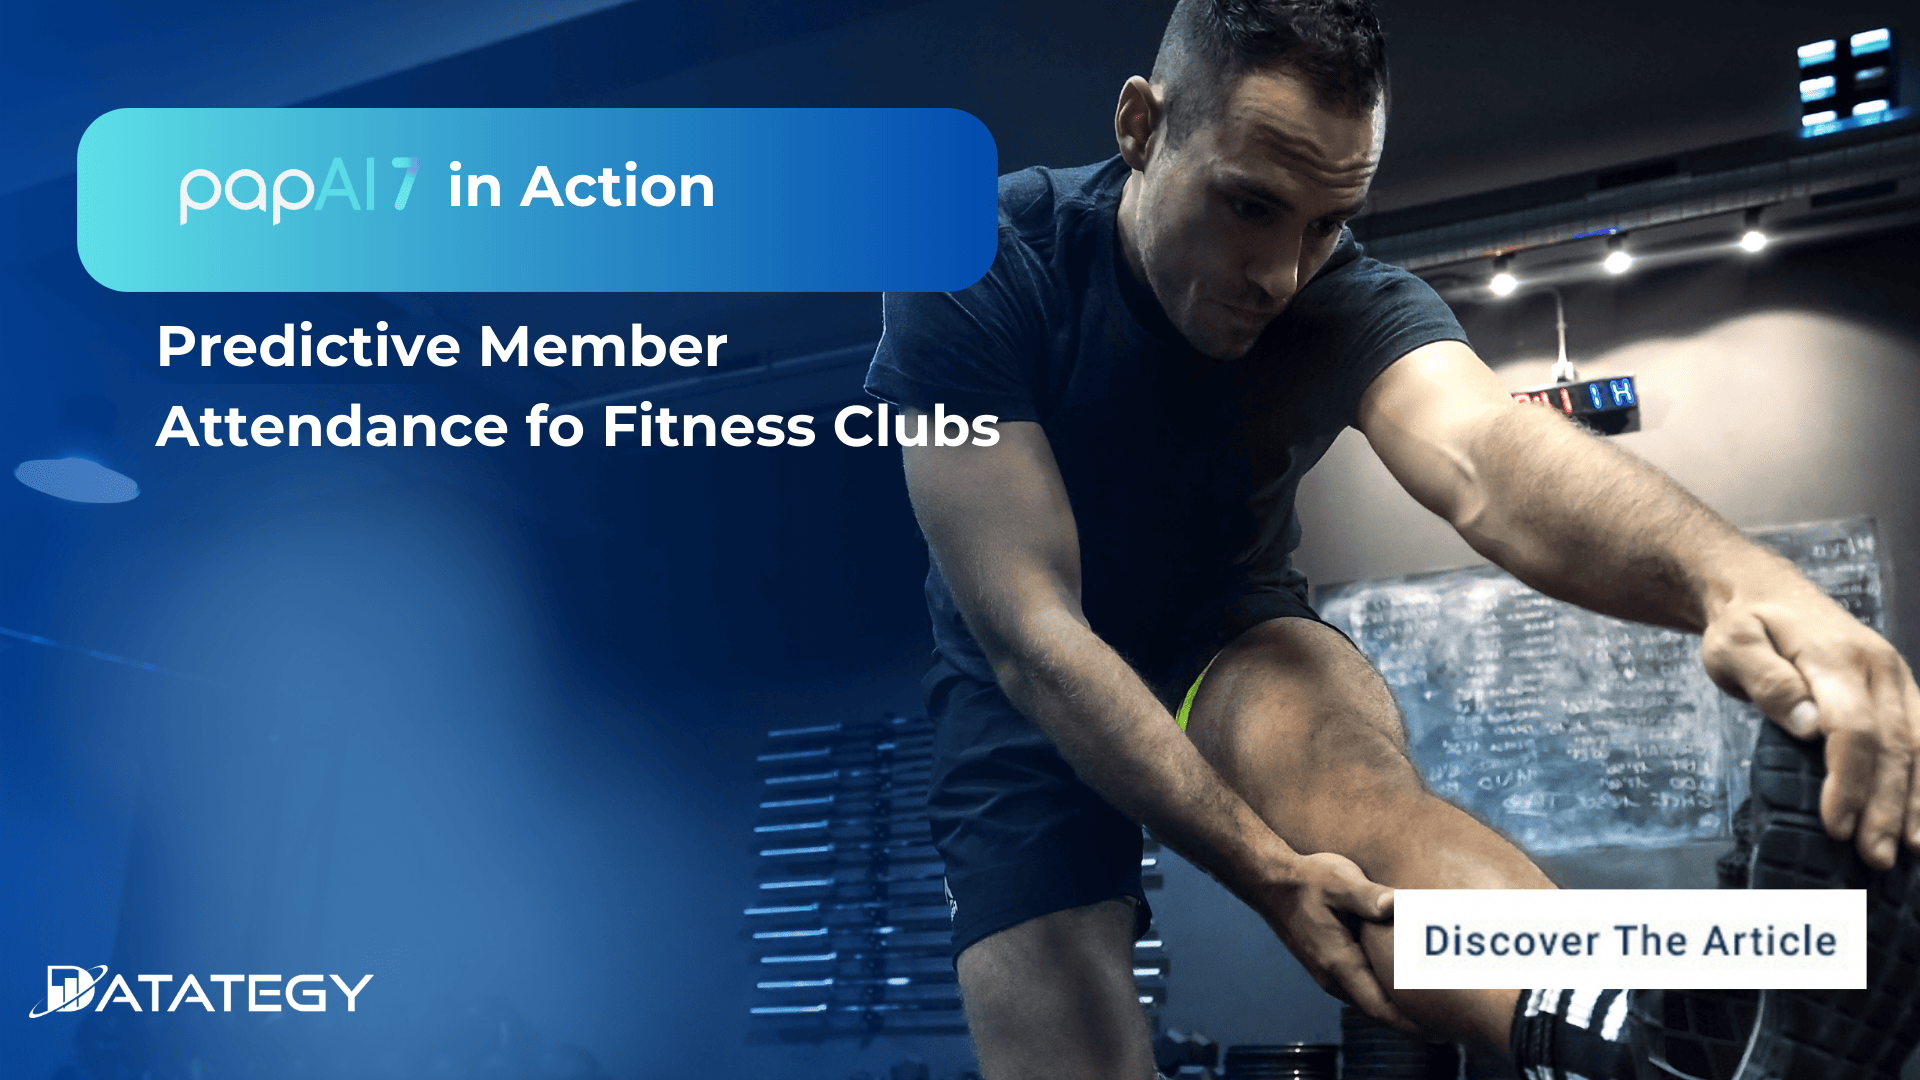 papAI 7 in Action: Predictive Member Attendance for Fitness Clubs